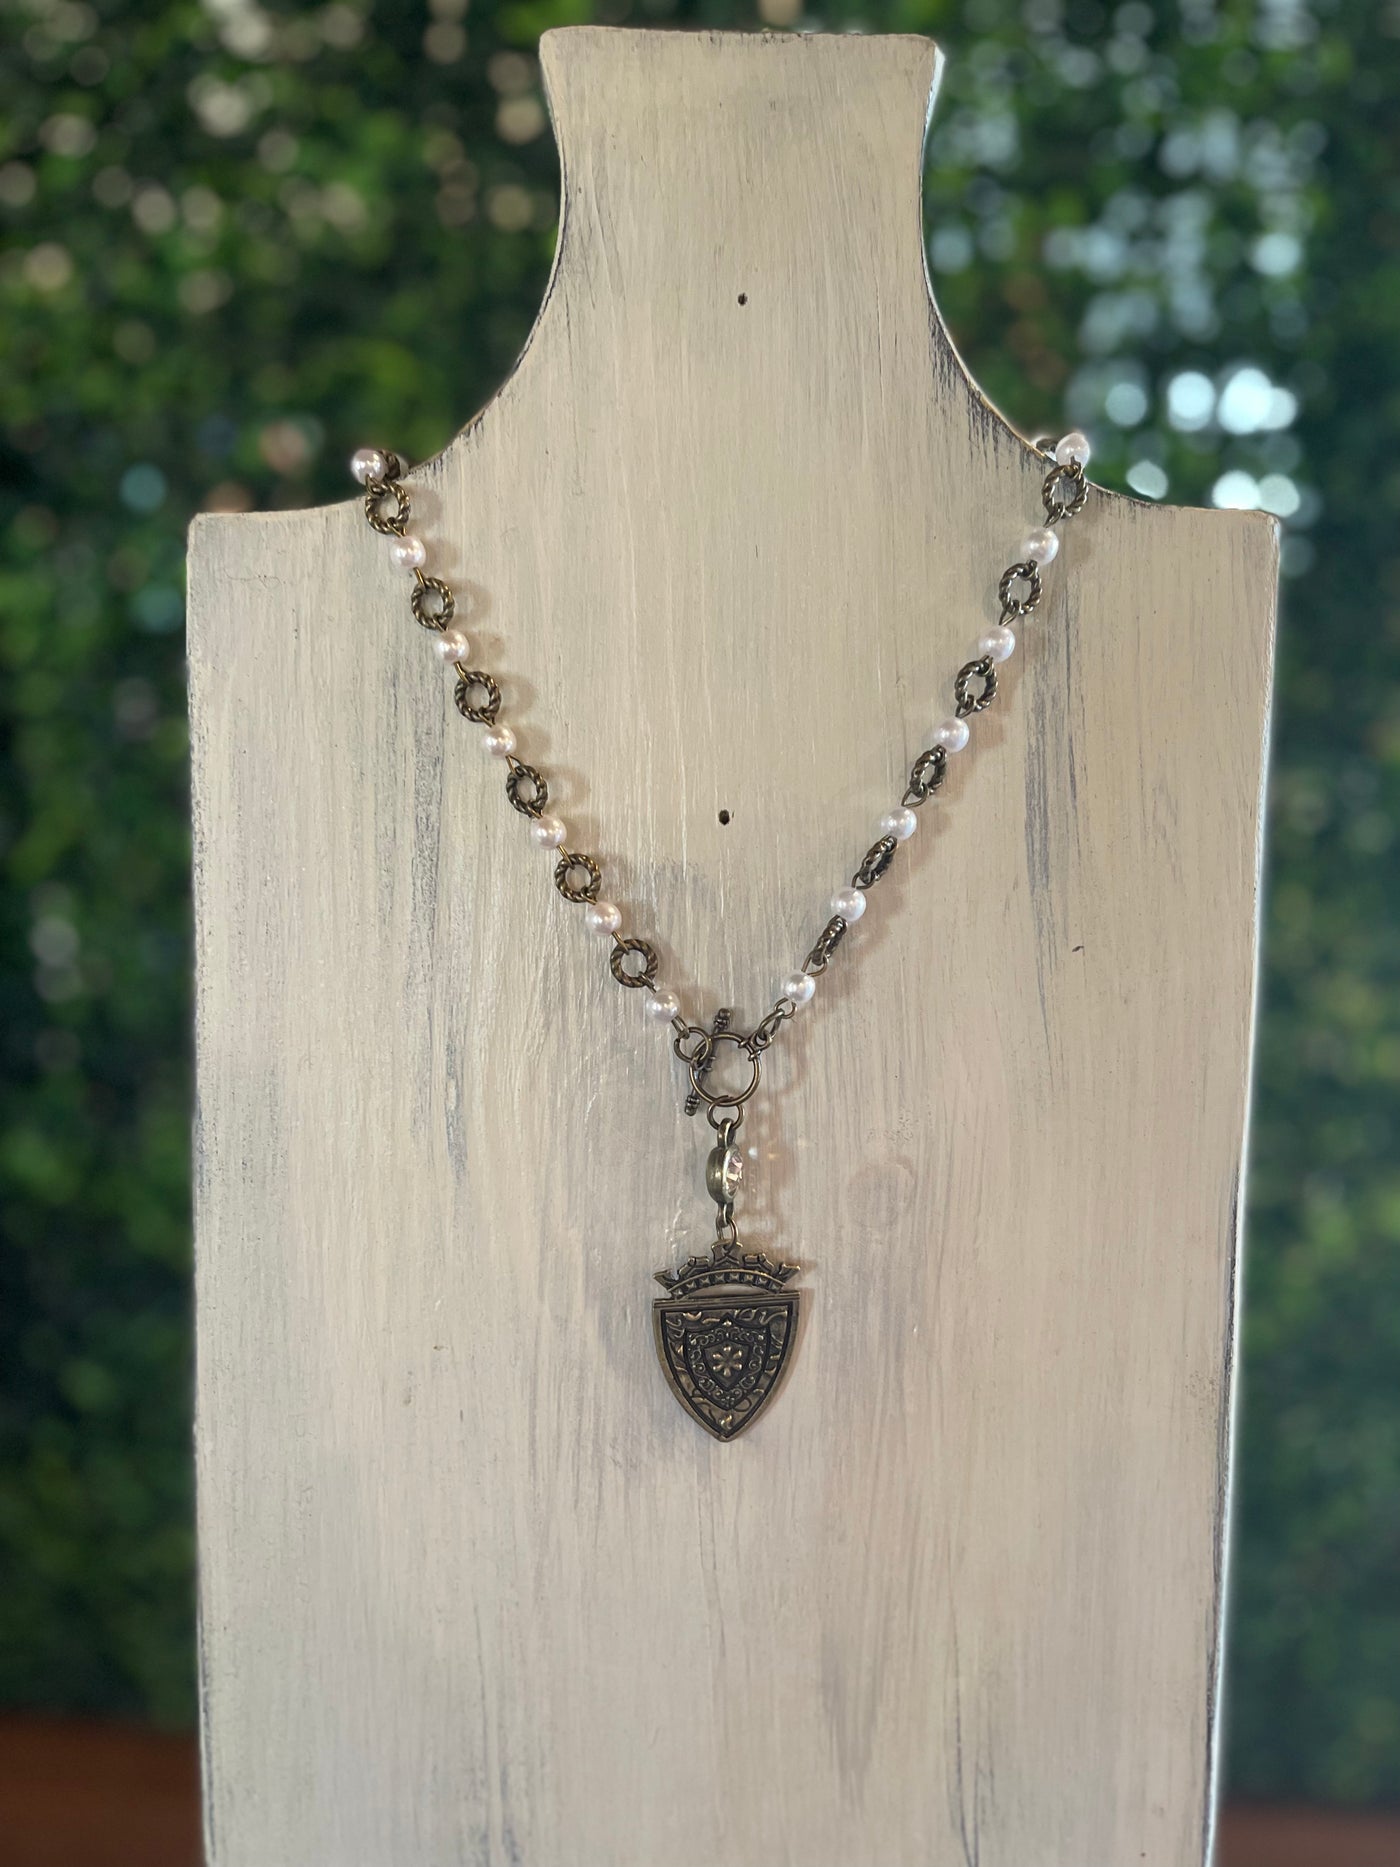 Antique Gold Necklace with Pearls and Bronze Pendant